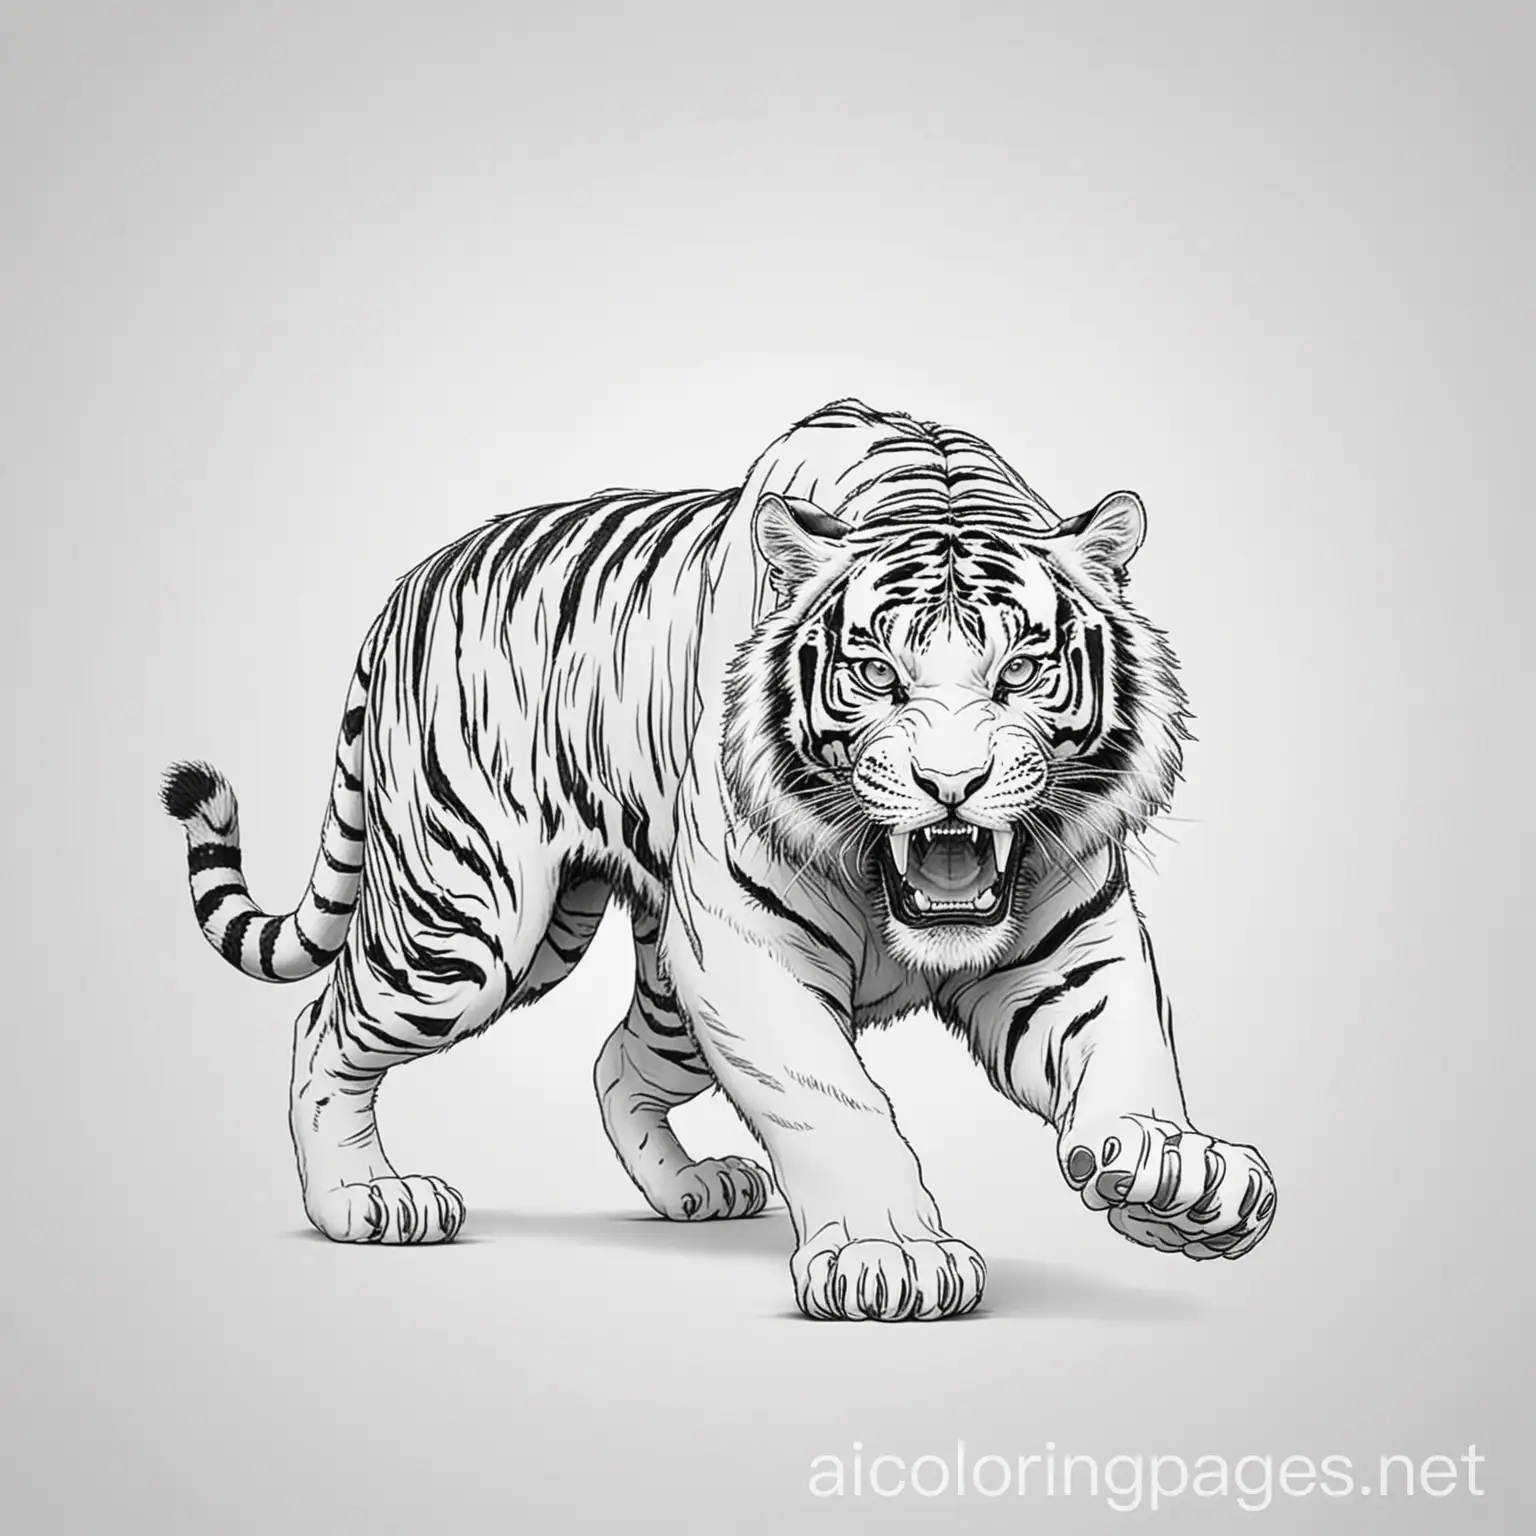 full body of a big big scary tiger who is ready to attack an animal with open mouth. Coloring Page, black and white, line art, white background, Simplicity, Ample White Space. The background of the coloring page is plain white to make it easy for young children to color within the lines. The outlines of all the subjects are easy to distinguish, making it simple for kids to color without too much difficulty, Coloring Page, black and white, line art, white background, Simplicity, Ample White Space. The background of the coloring page is plain white to make it easy for young children to color within the lines. The outlines of all the subjects are easy to distinguish, making it simple for kids to color without too much difficulty, Coloring Page, black and white, line art, white background, Simplicity, Ample White Space. The background of the coloring page is plain white to make it easy for young children to color within the lines. The outlines of all the subjects are easy to distinguish, making it simple for kids to color without too much difficulty